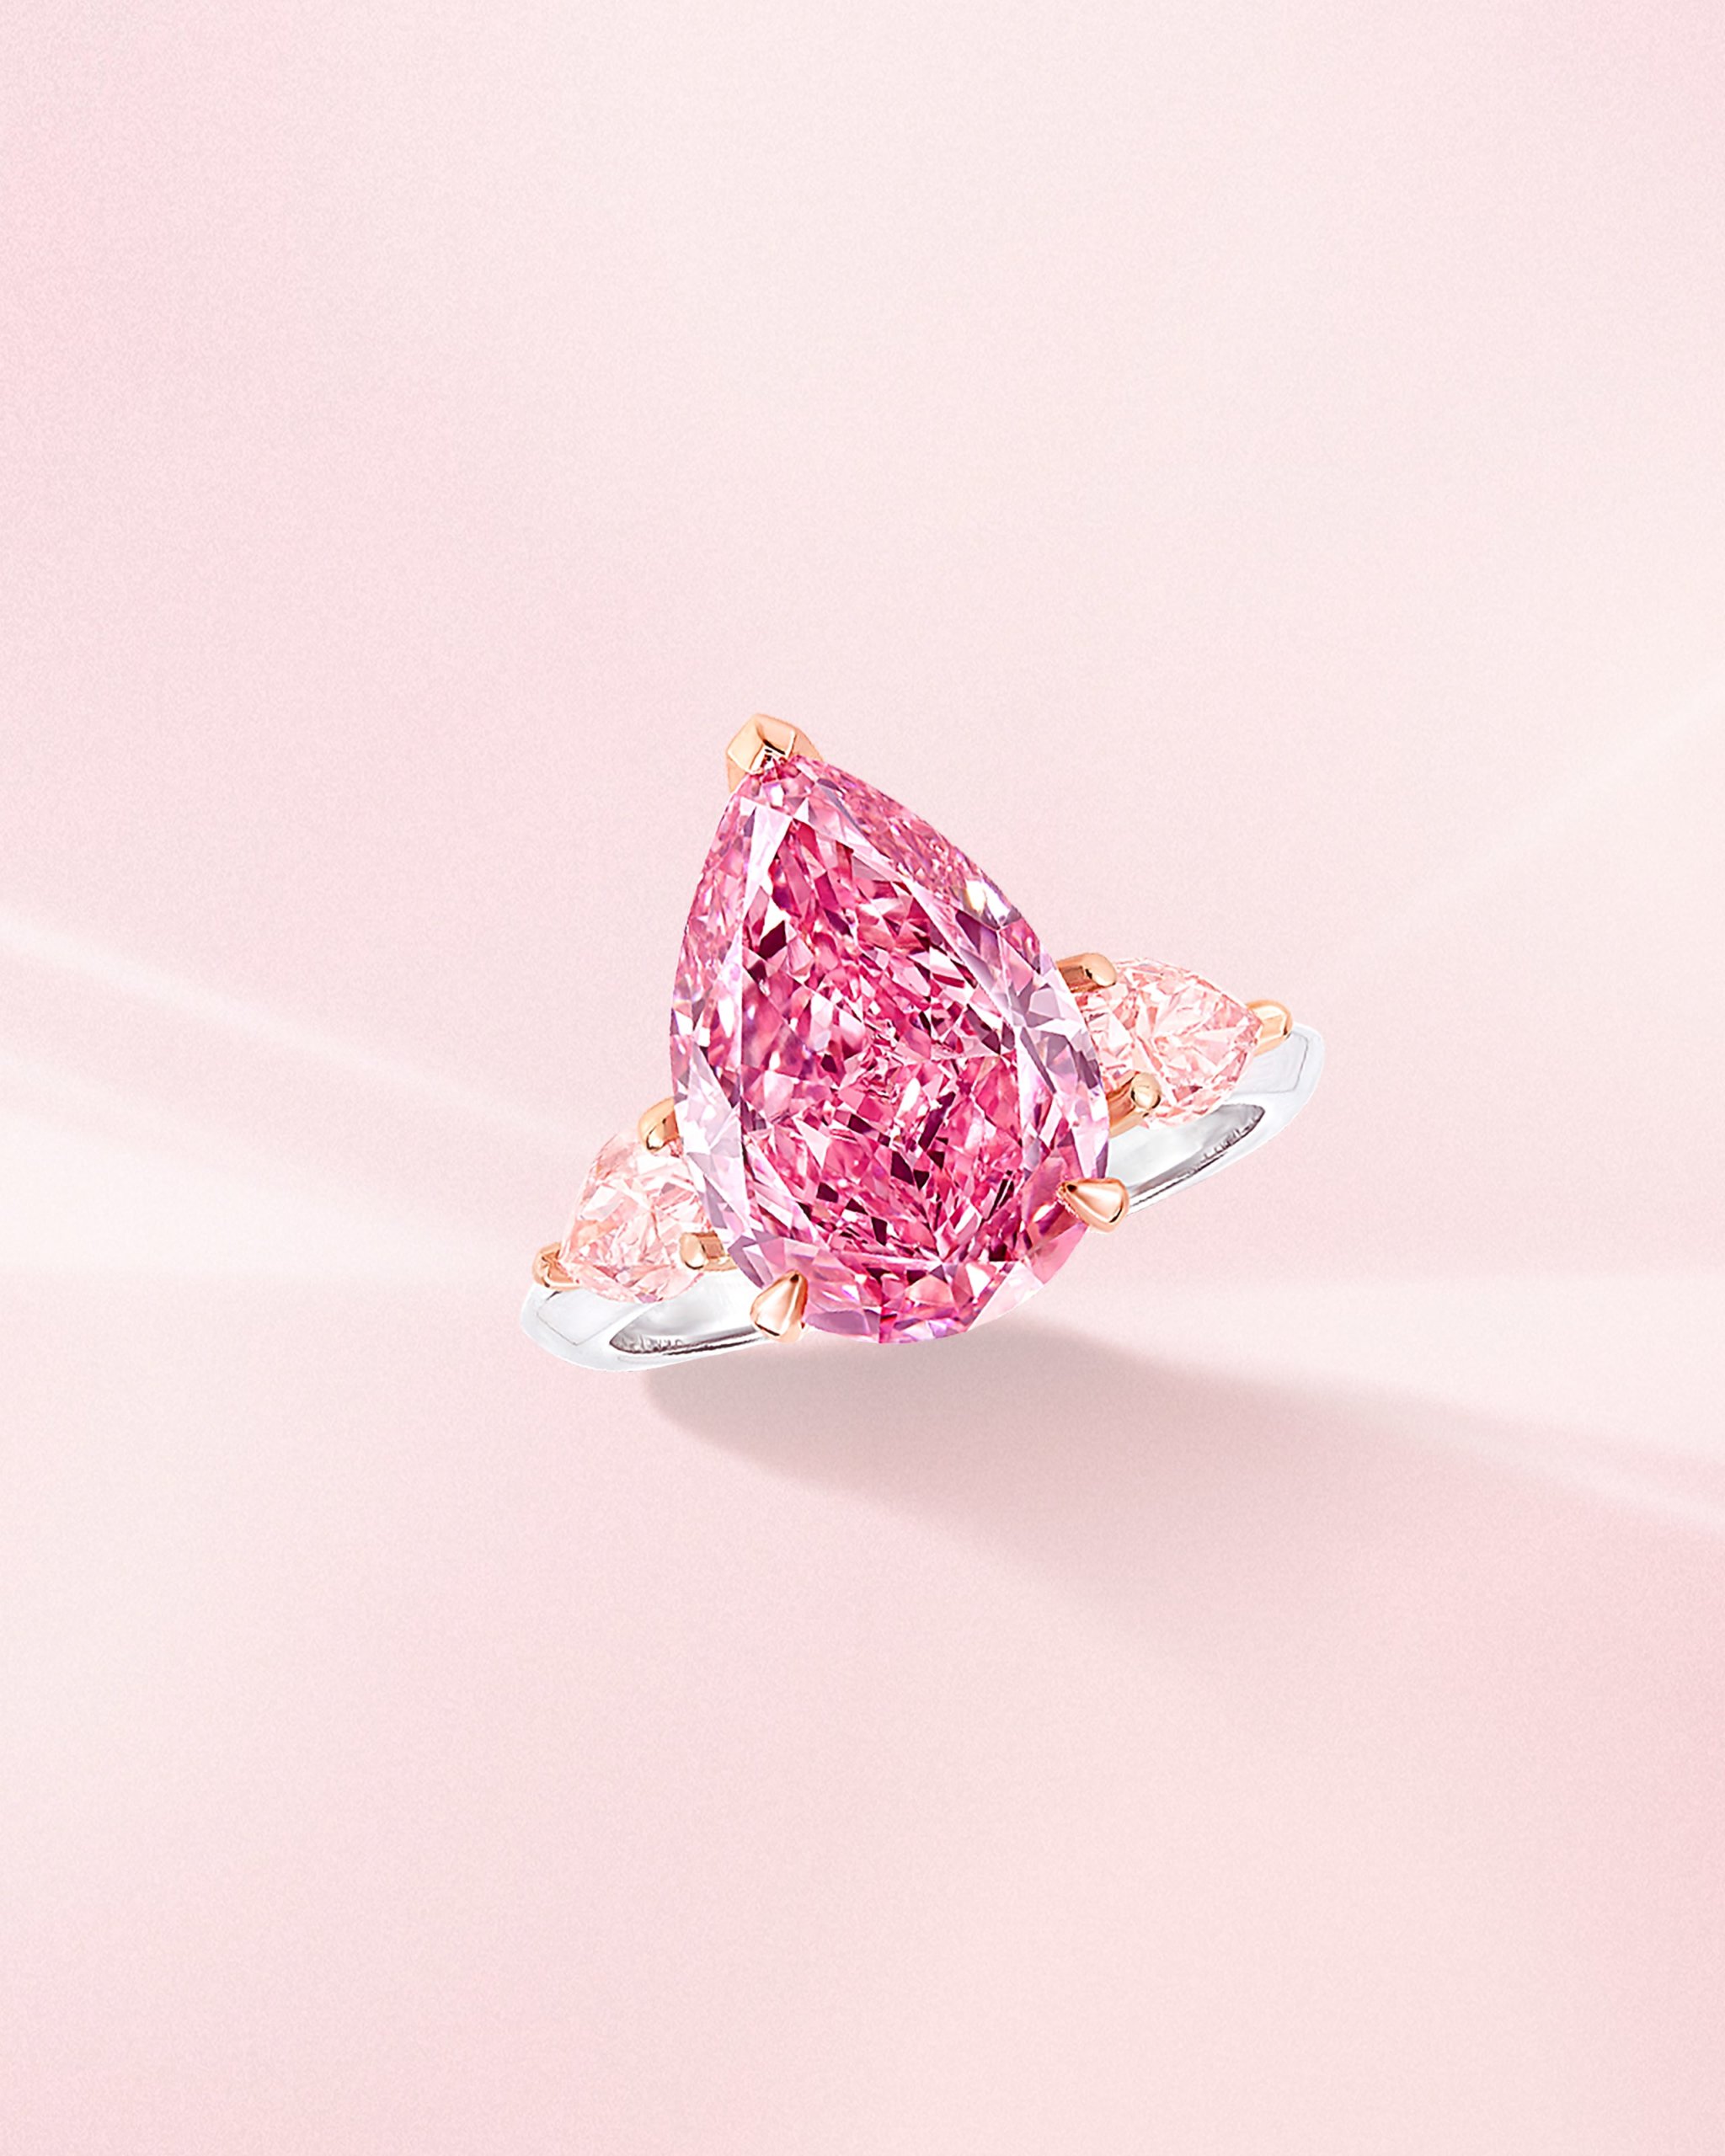 Choosing a Pink Diamond Engagement Ring The Ultimate guide - Hatton Garden